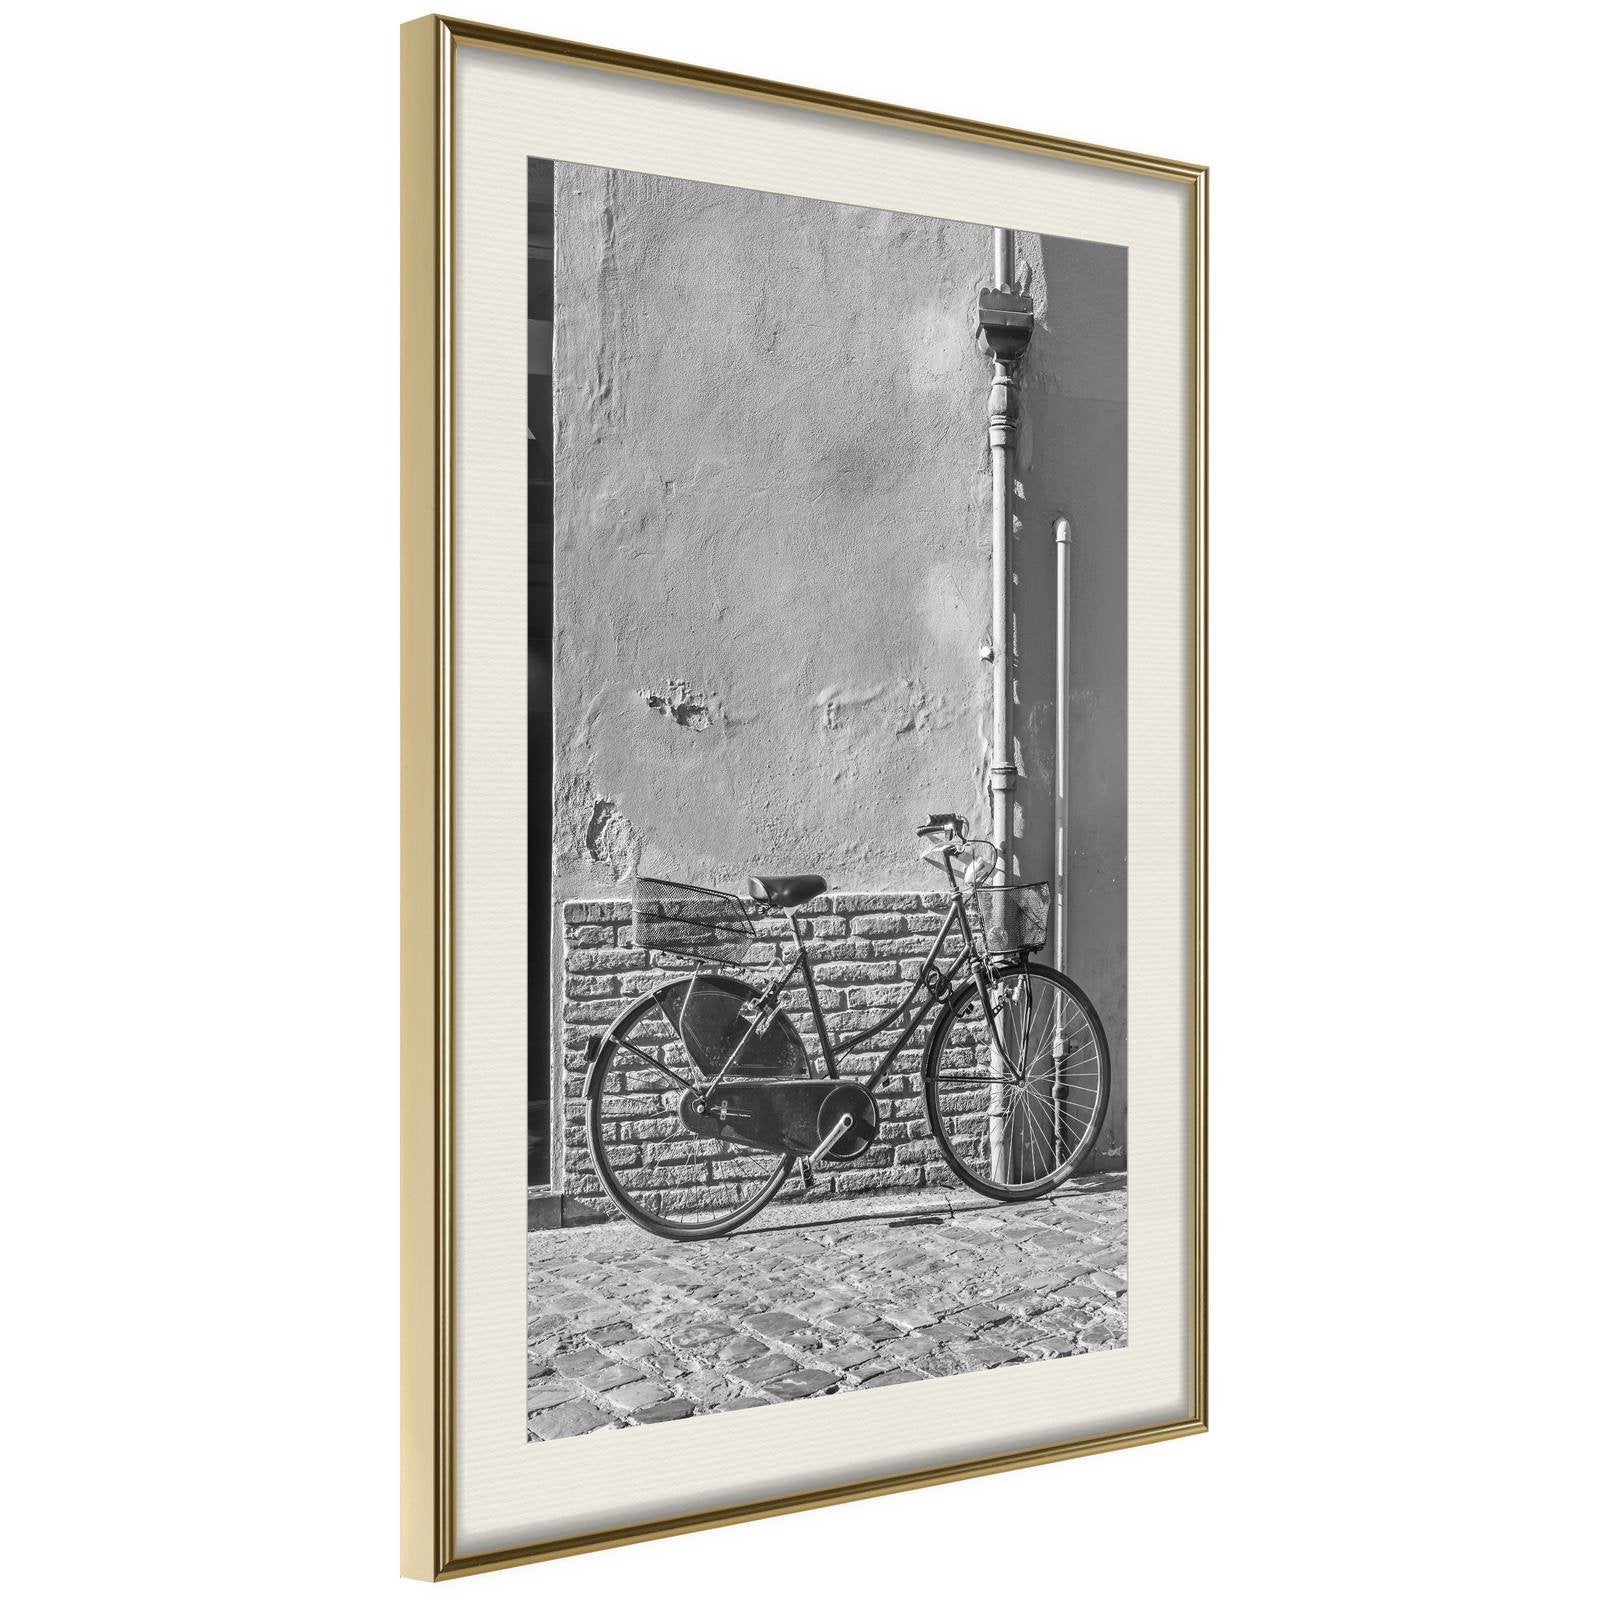 Inramad Poster / Tavla - Bicycle with Black Tires-Poster Inramad-Artgeist-20x30-Guldram med passepartout-peaceofhome.se